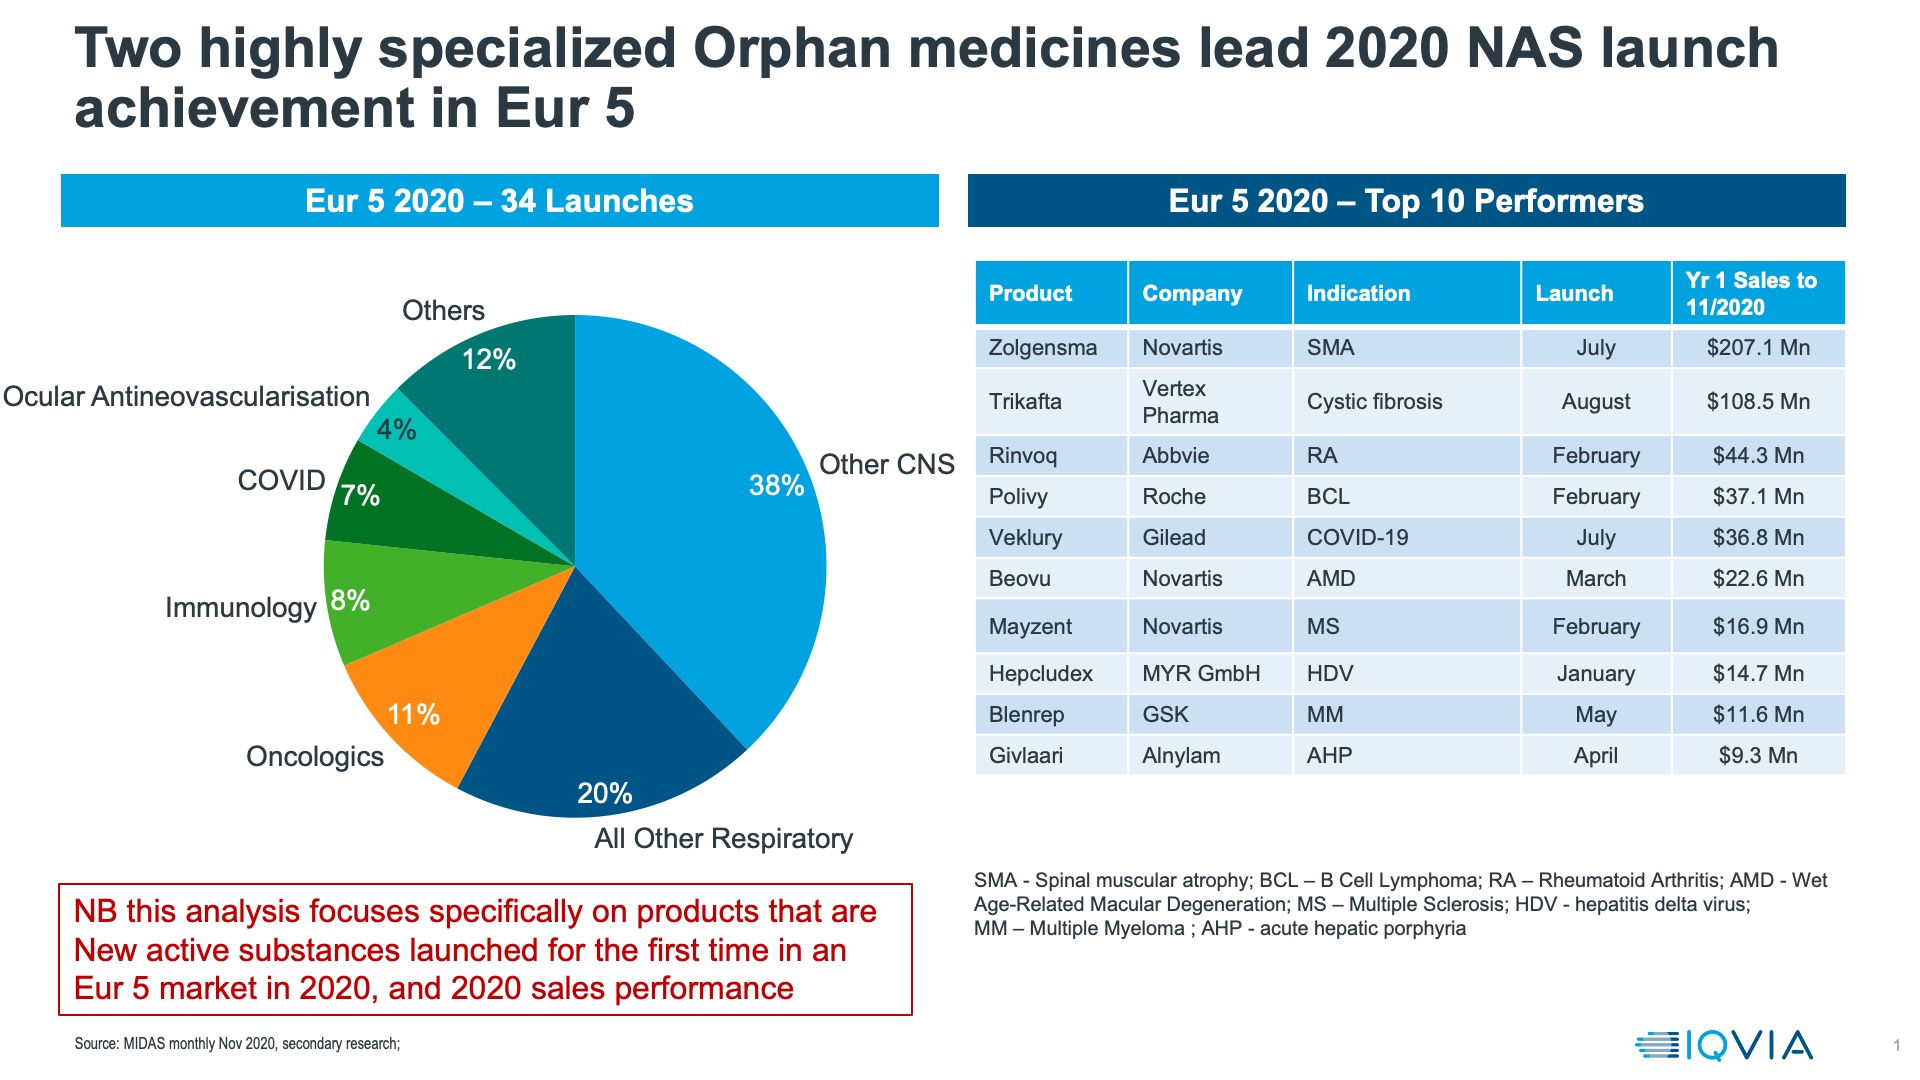 Two highly specialized Orphan medicines lead 2020 NAS launch achievement in Eur 5